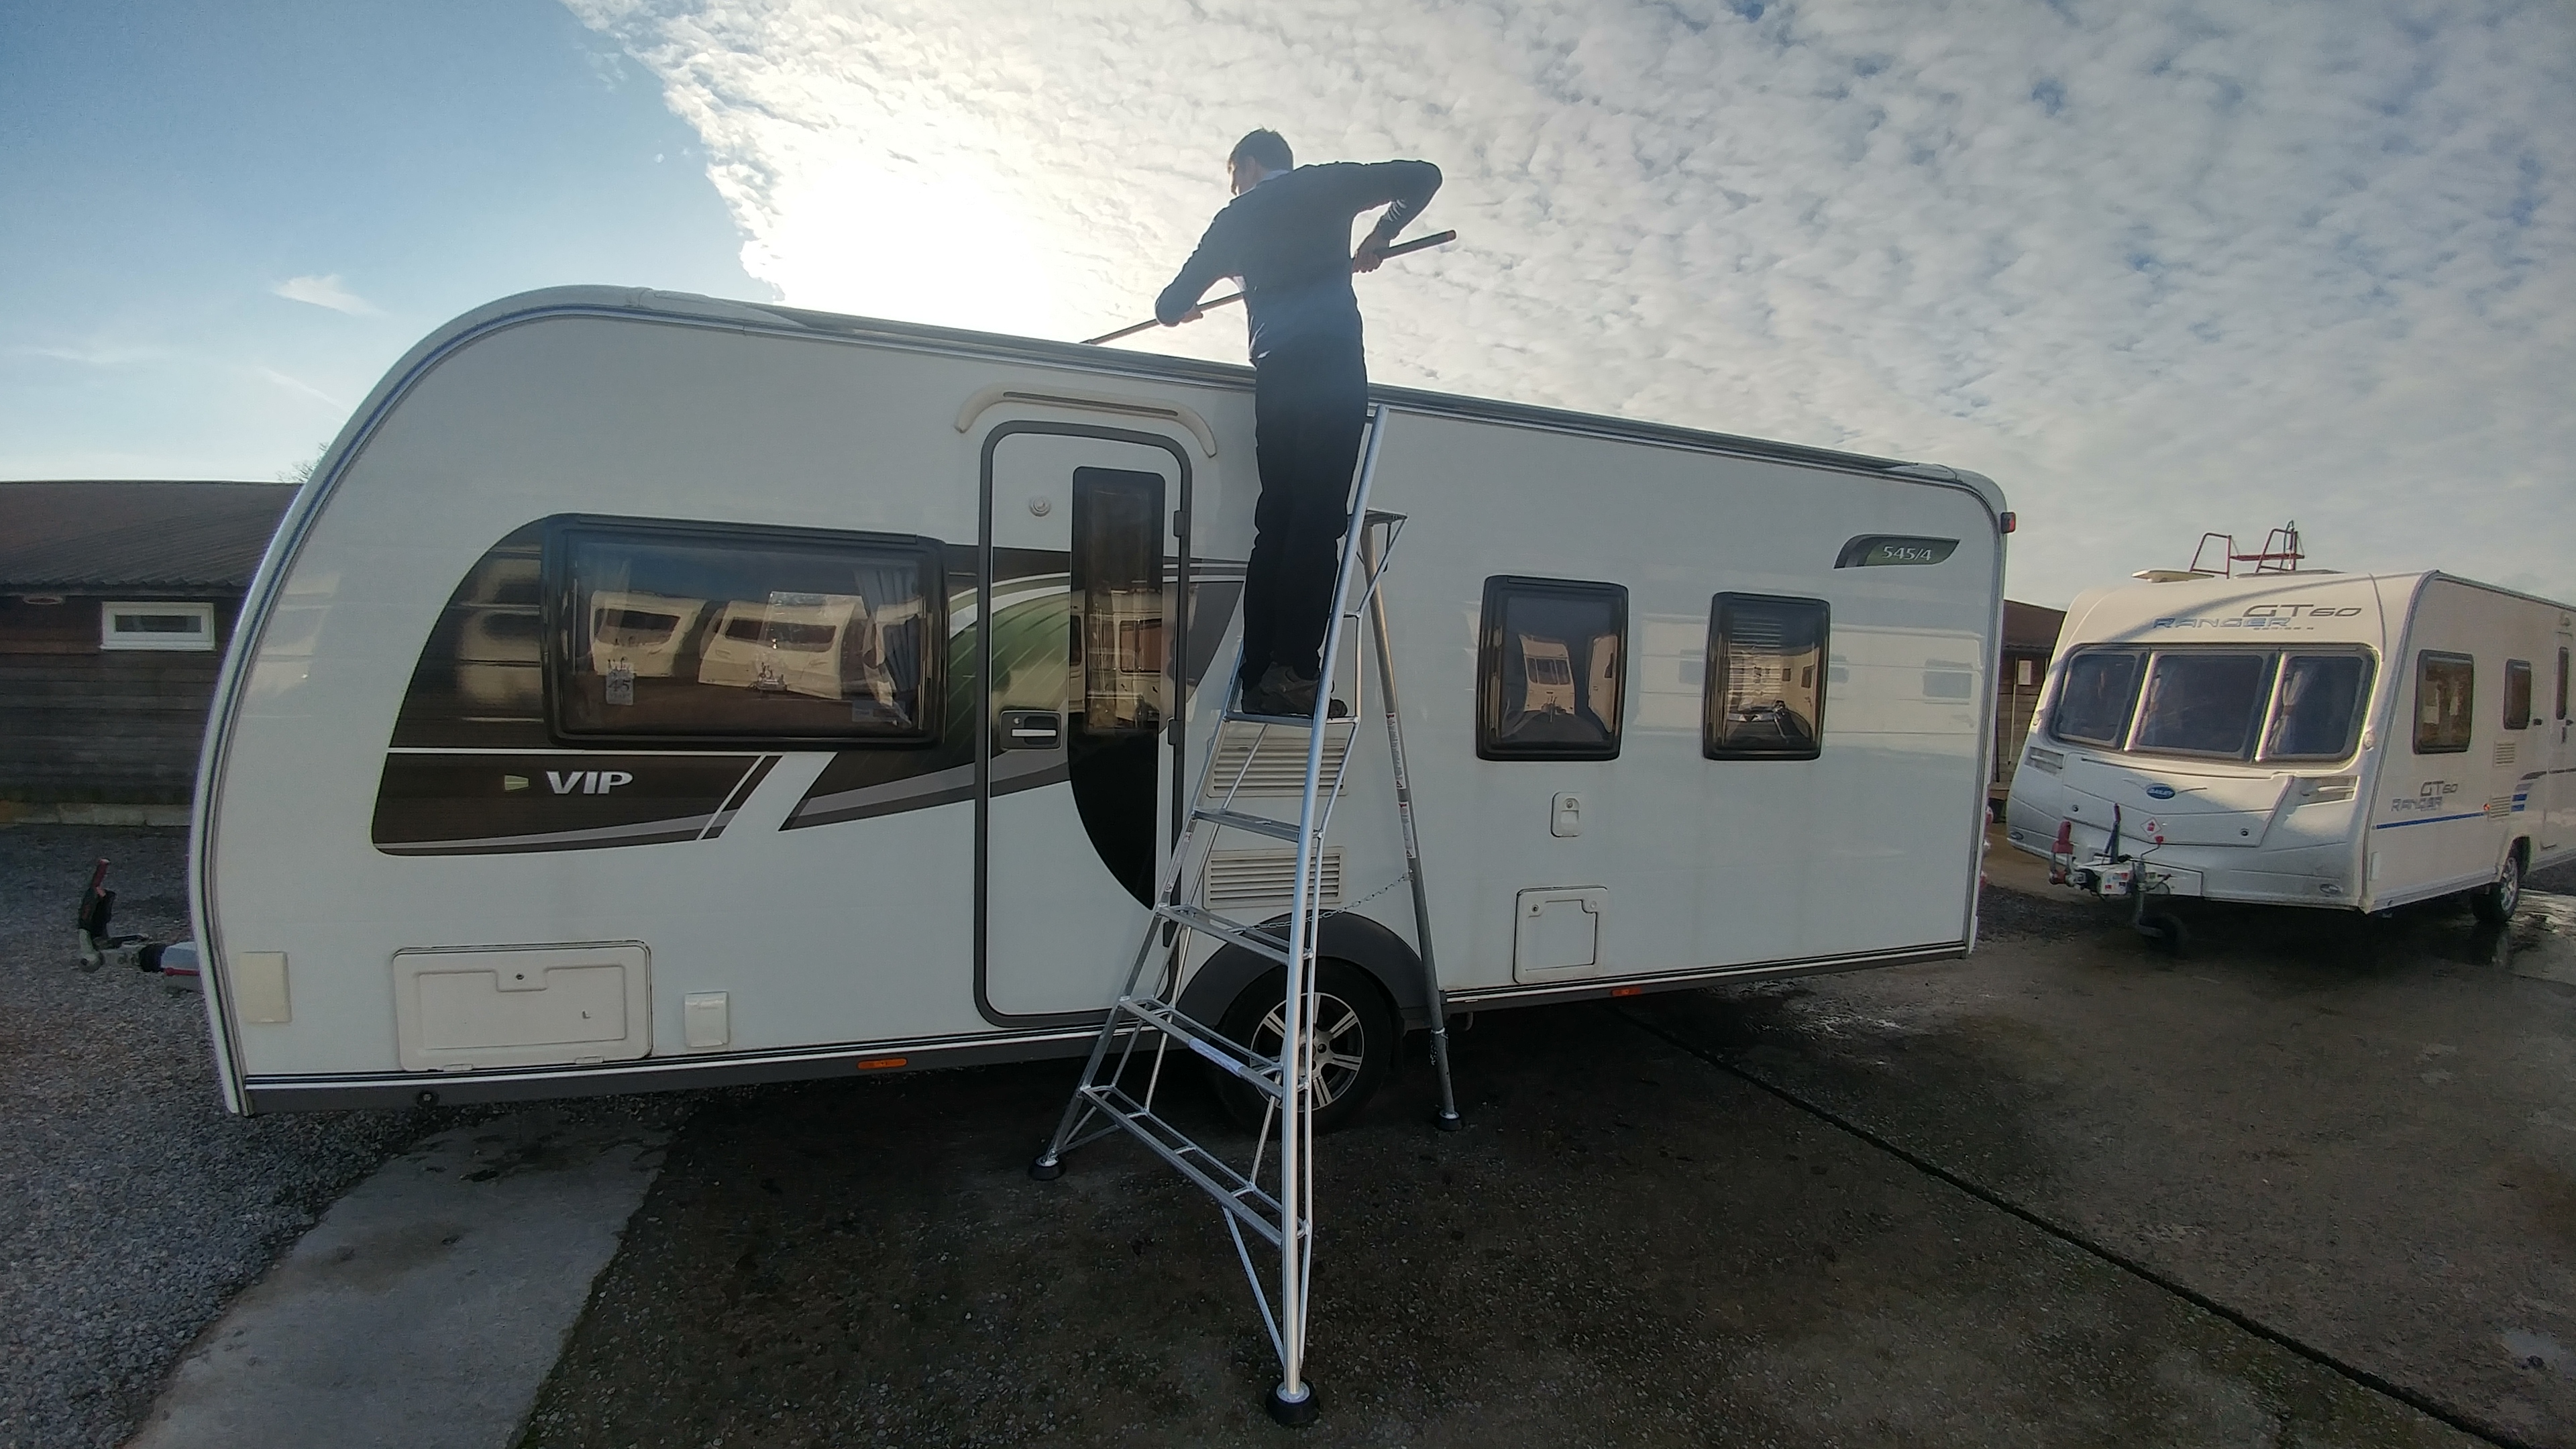 Man cleaning caravan roof with tripod ladder